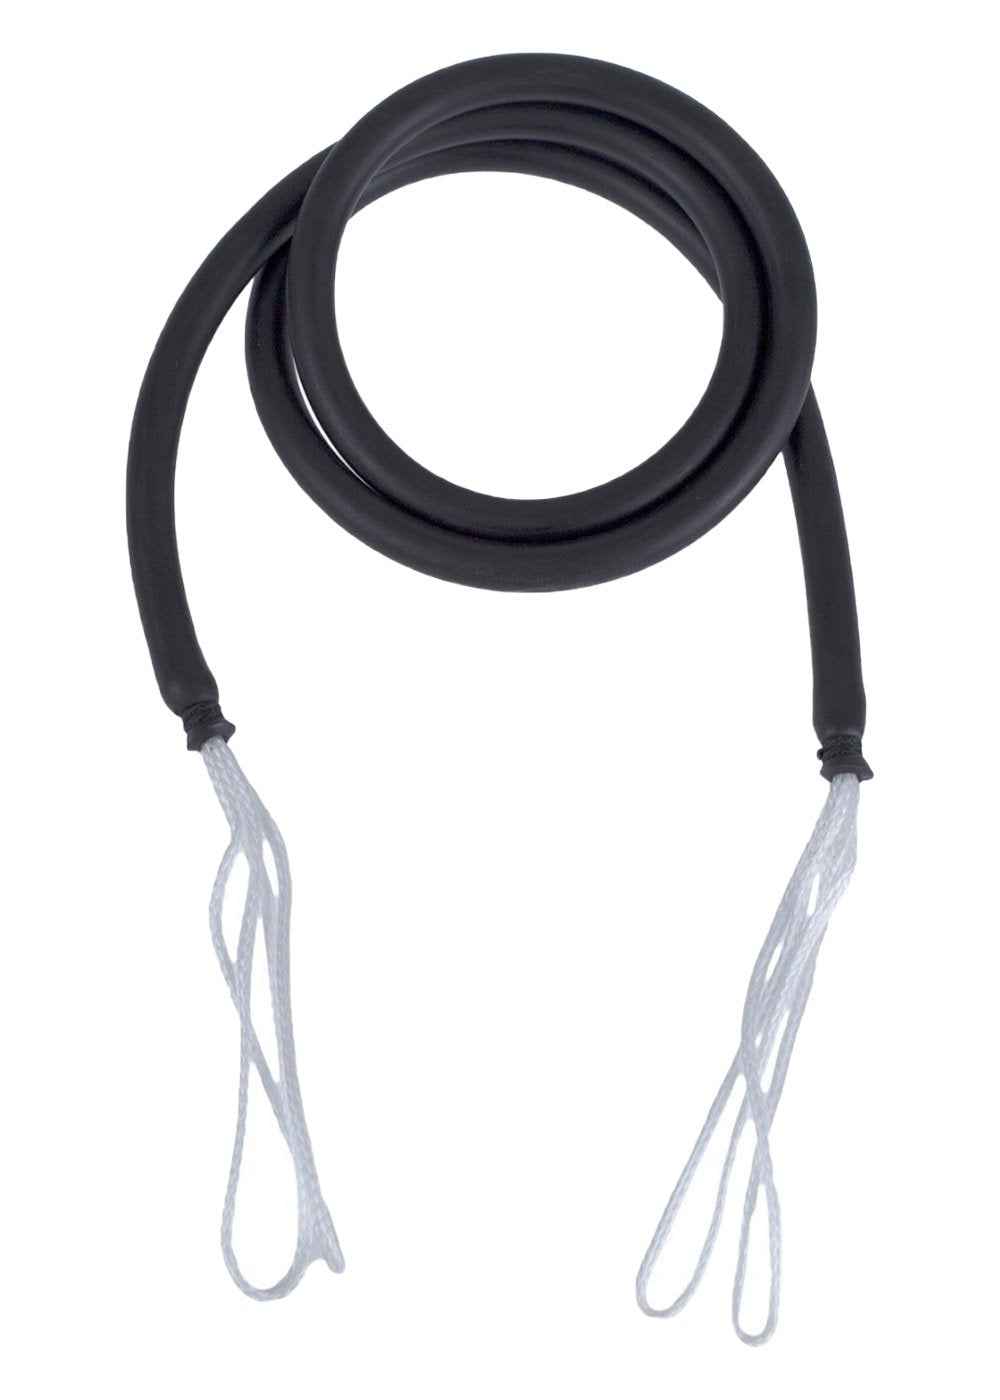 Adreno Float Line Bungee - 3m - Adreno - Ocean Outfitters